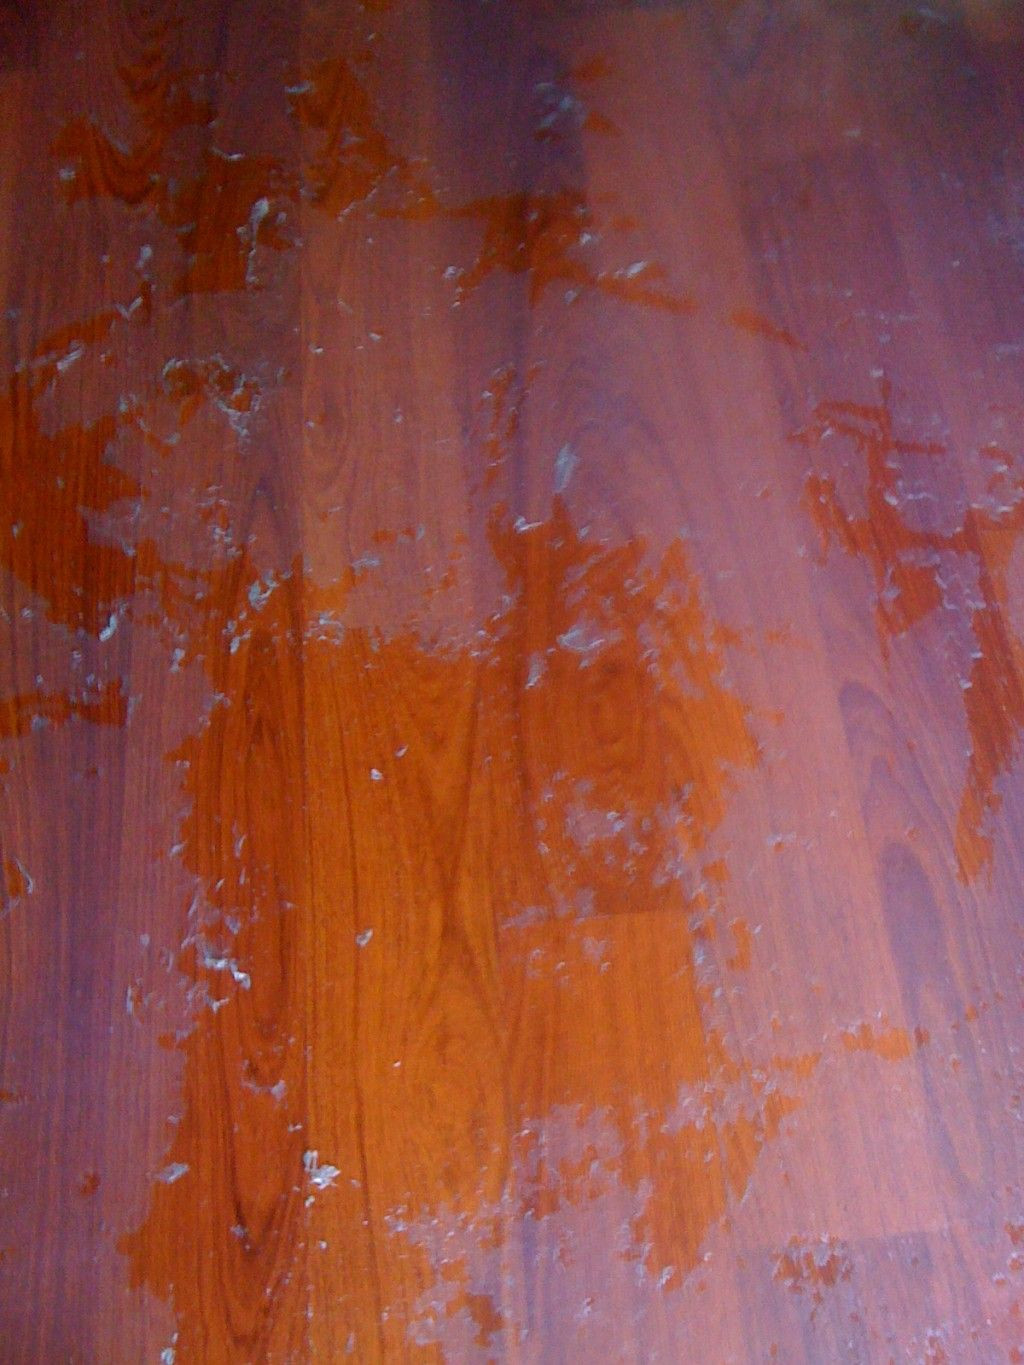 hardwood flooring joplin mo of how to remove wax and oil soap cleaners from wood floors recipes intended for how to remove oily or wax build up from cleaning or polishing solutions from wood floors